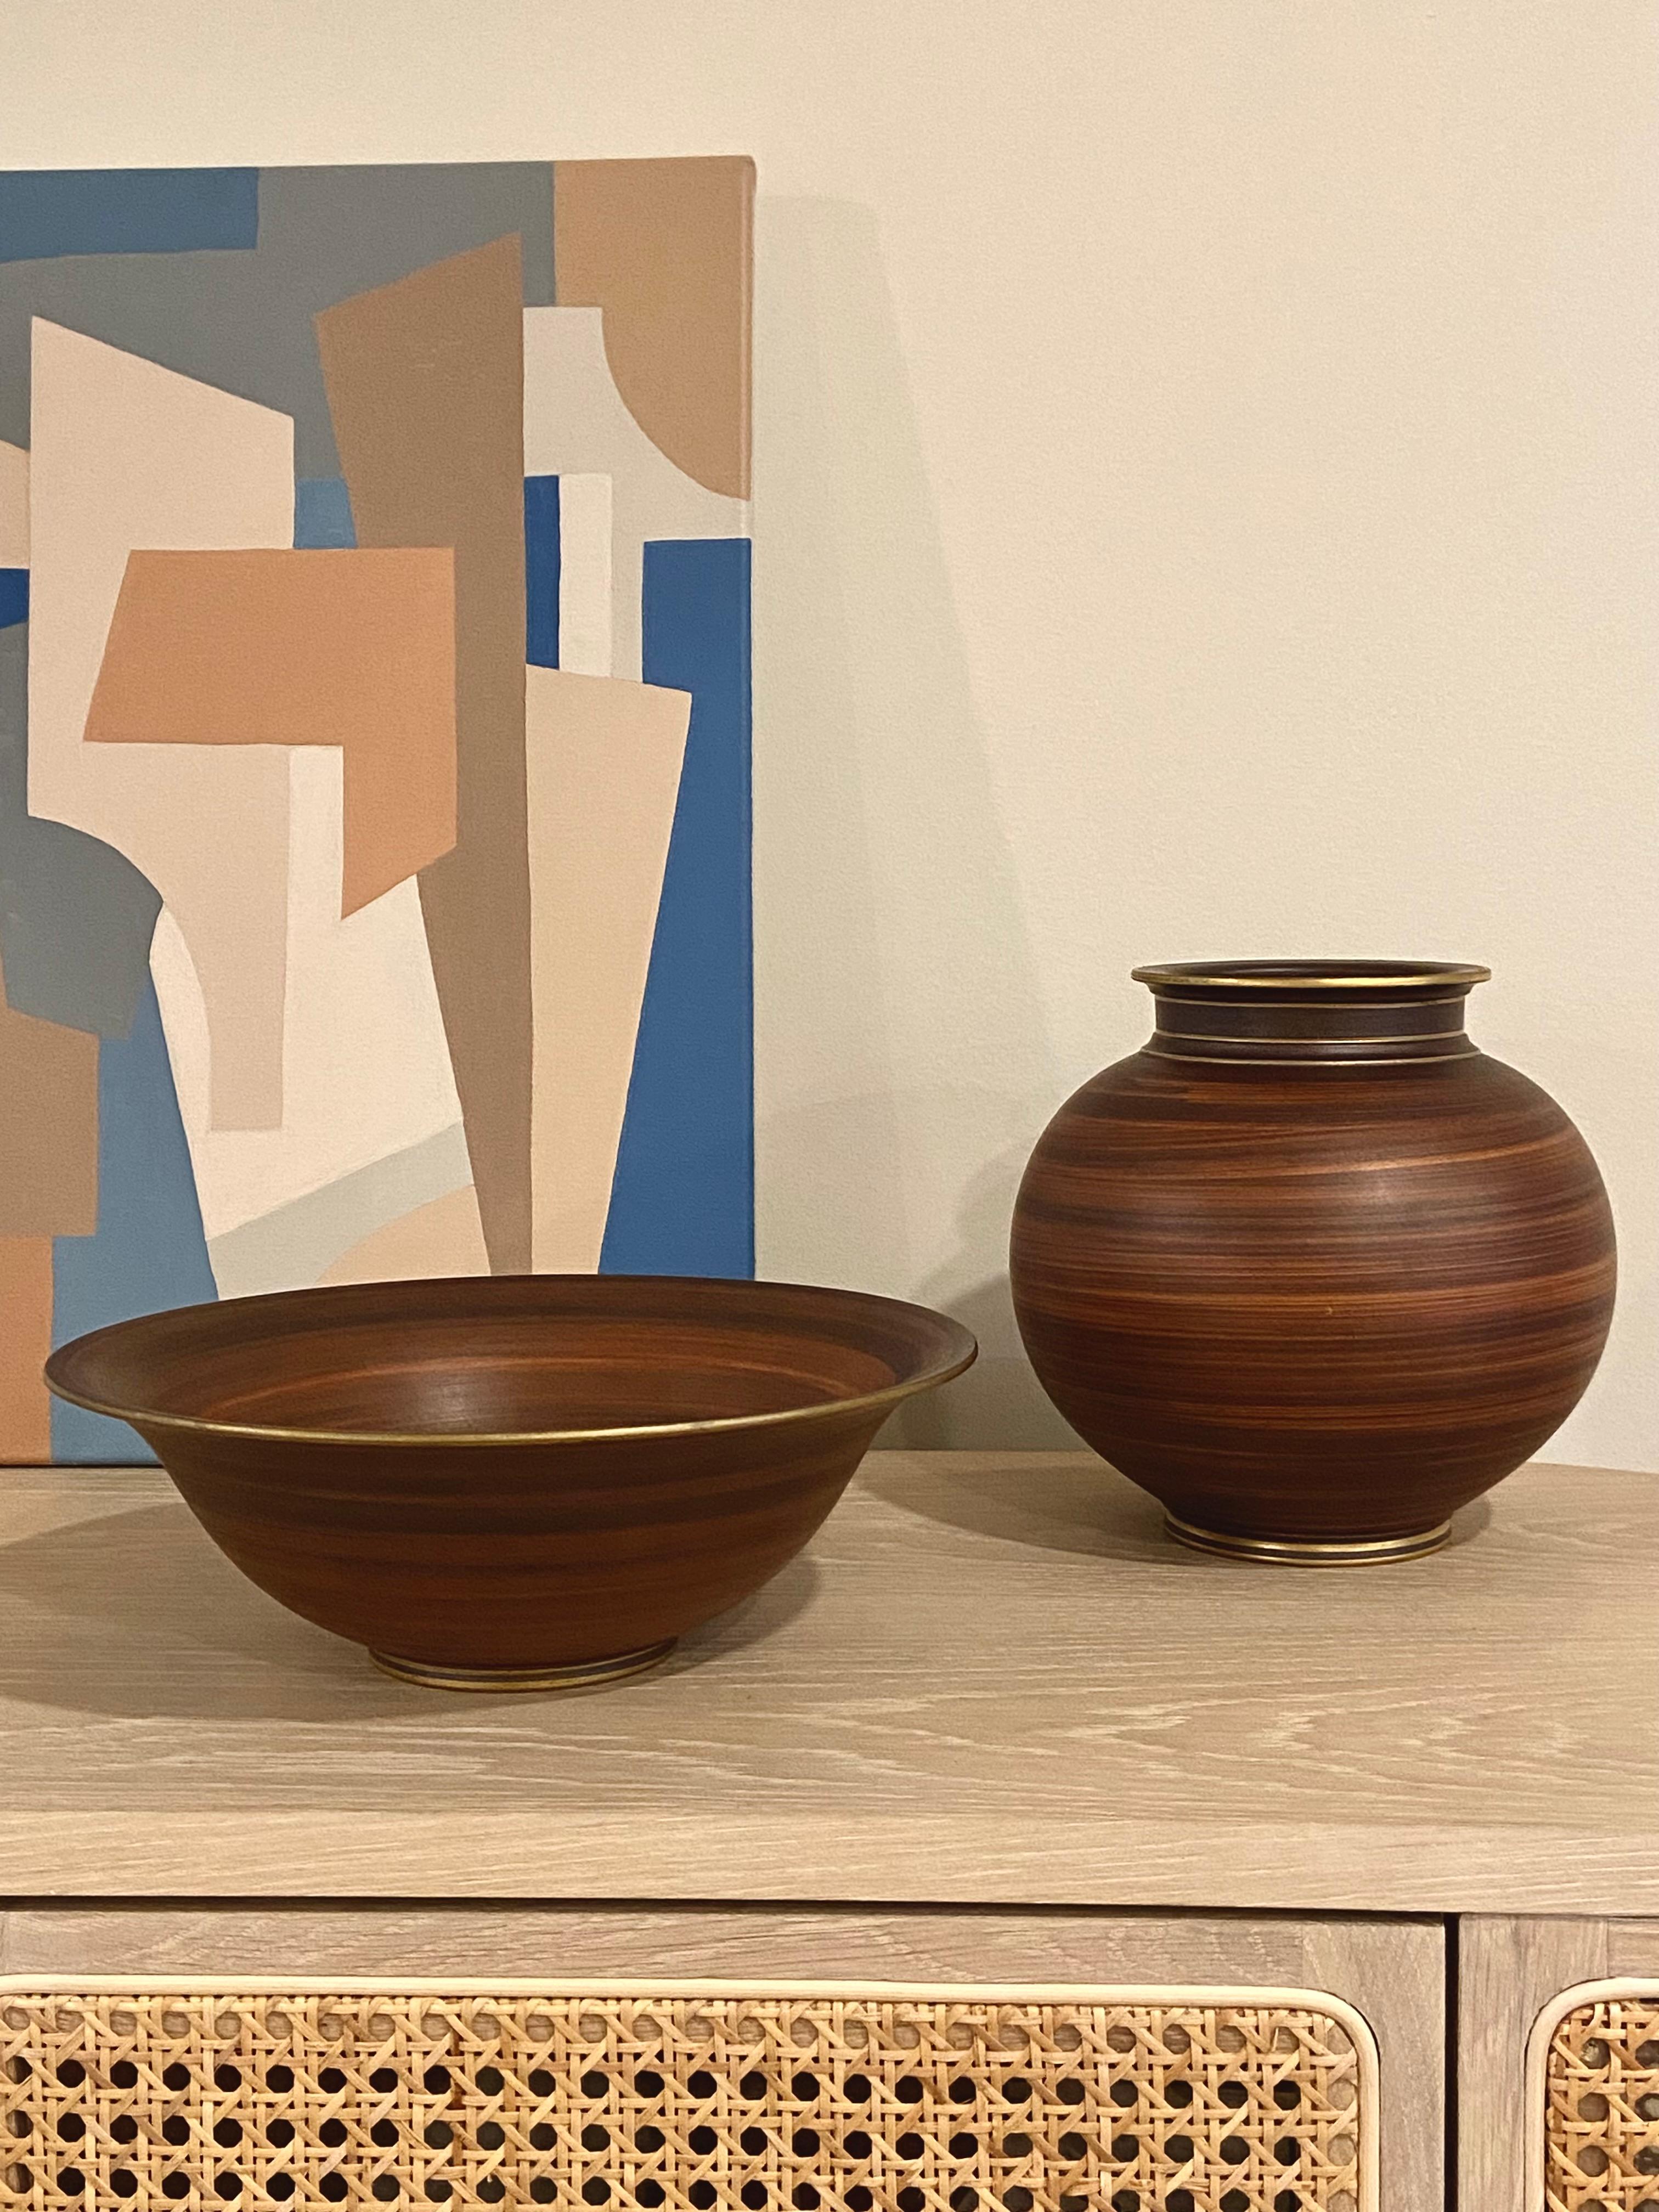 A fantastic pair of vintage Gunnar Nylund designed ceramics. This bowl and vase pair have an extraordinary hand painted faux boise wood grain pattern. They have a matte burnt sienna glaze that's been applied with a dry brush and the effect is a warm